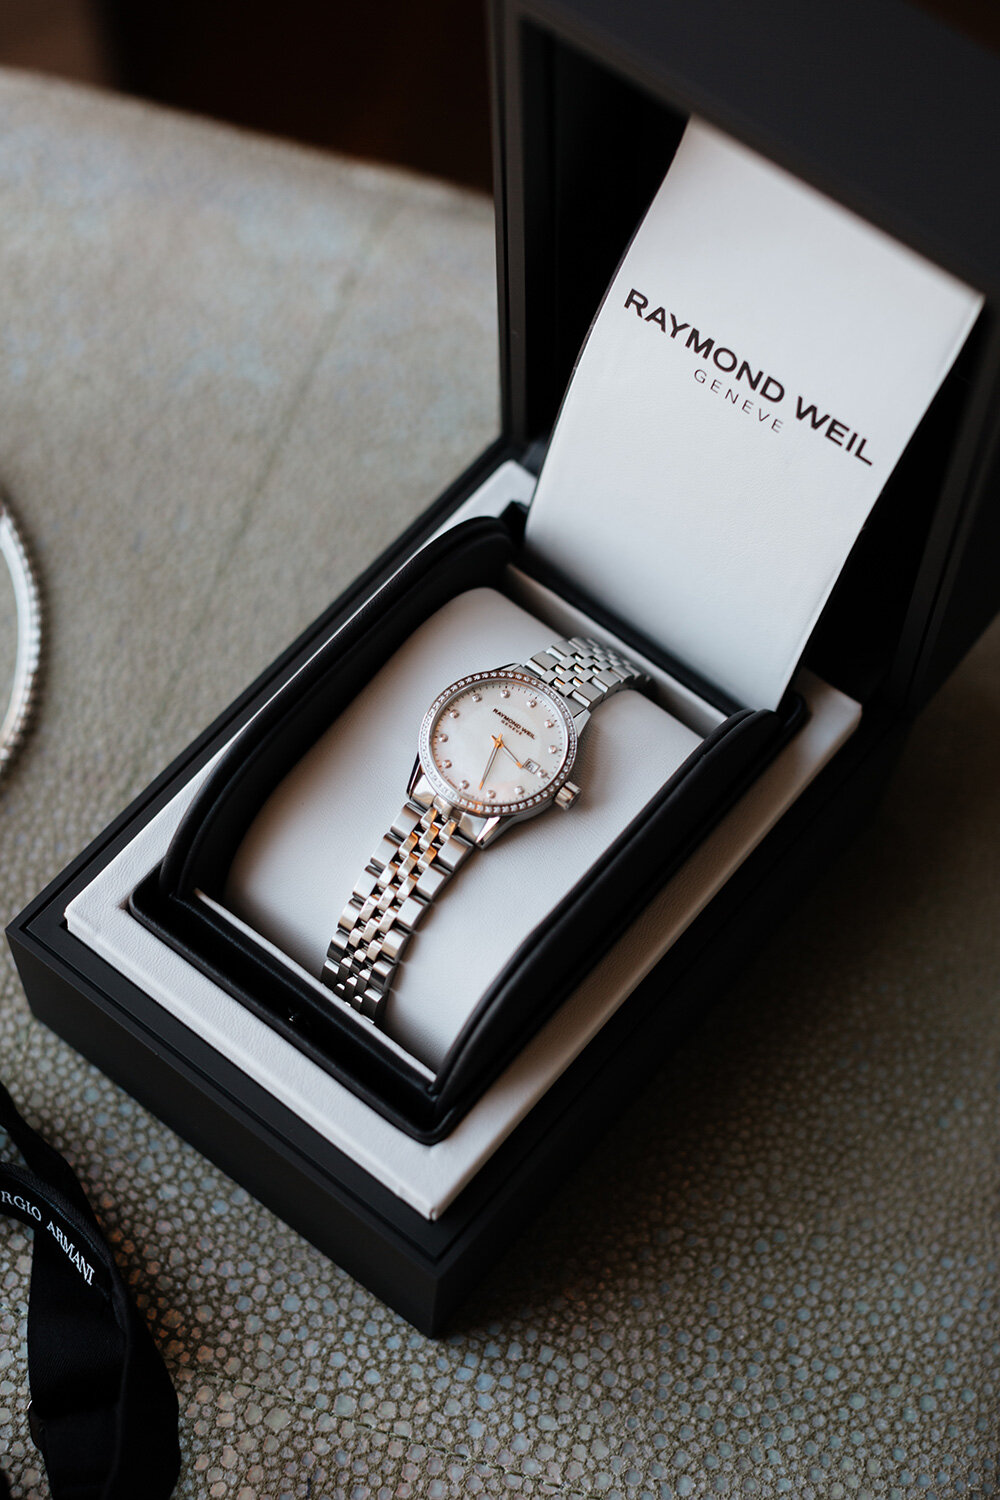 The Gift of Time – The Raymond Weil Freelancer, Two Tone with Diamonds